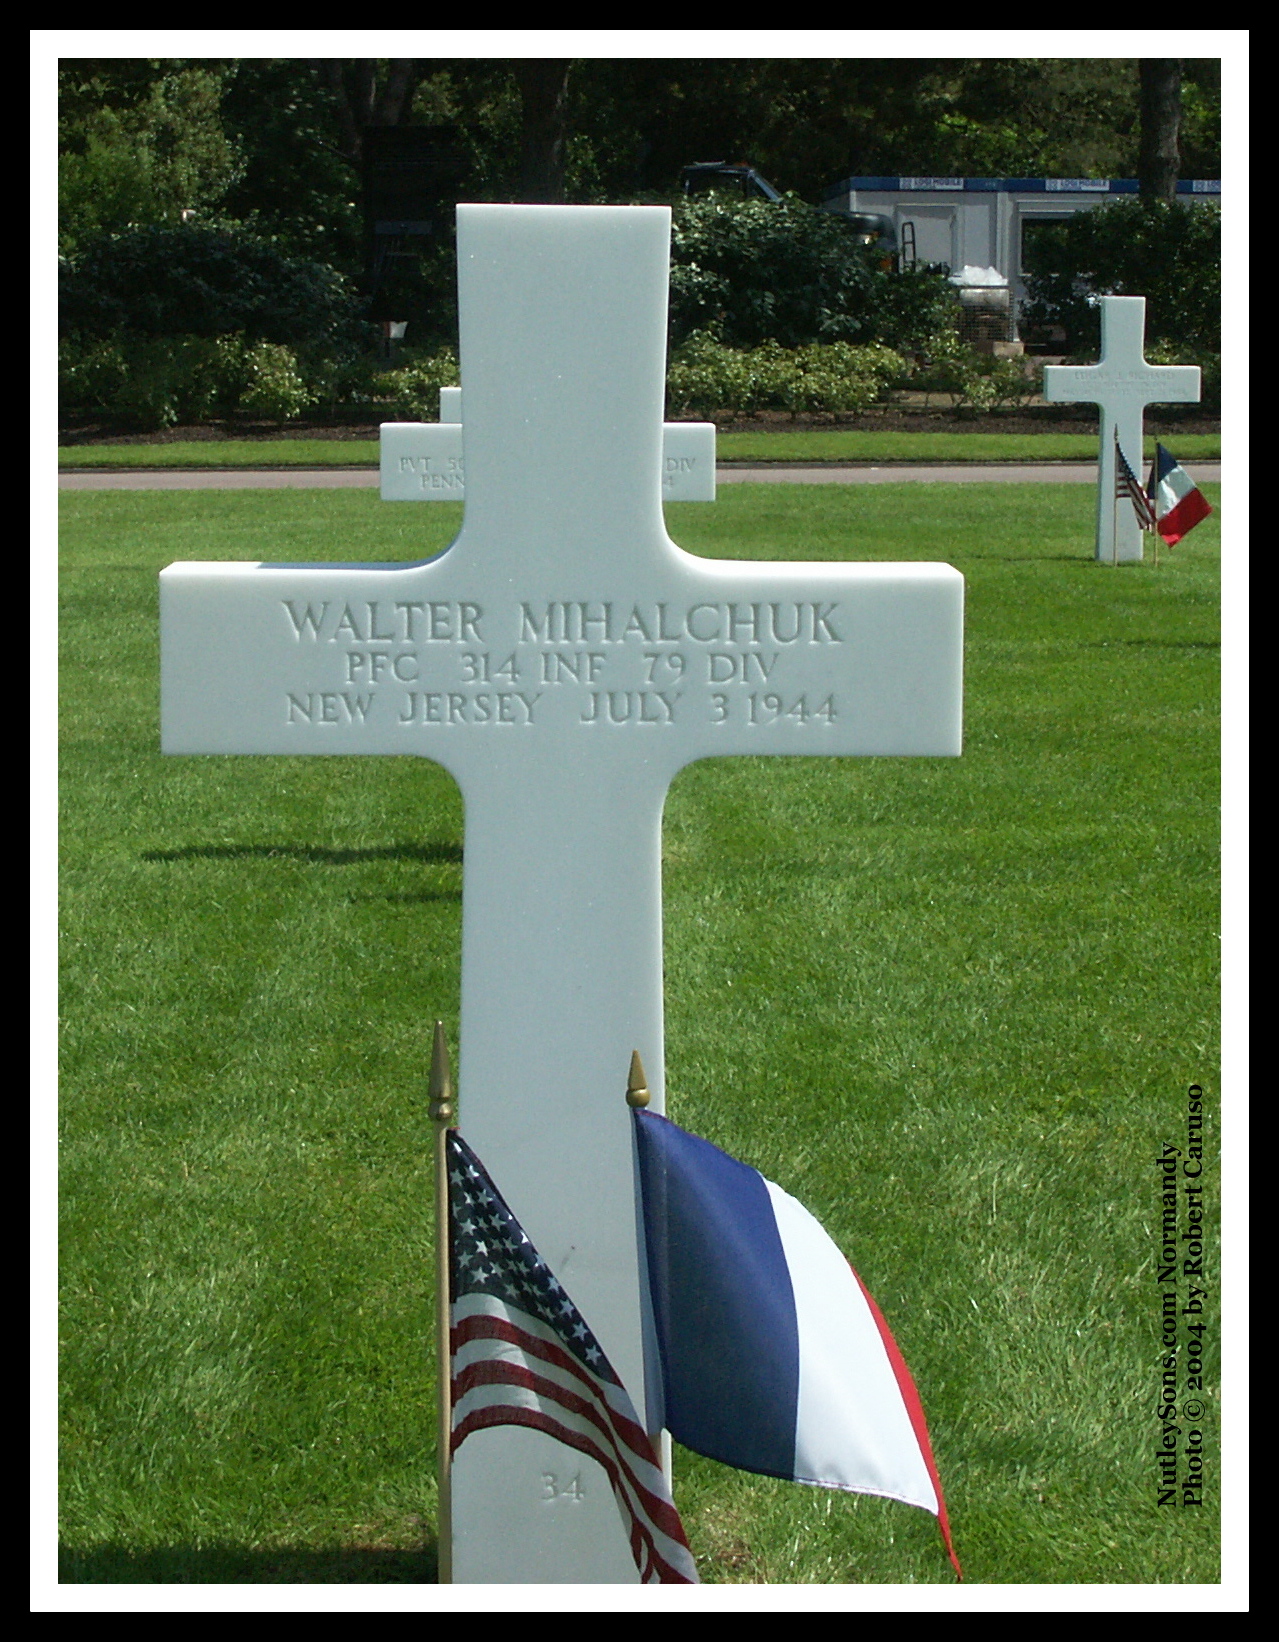 Pfc. Walter Mihalchuk of Nutley, N.J., was KIA on July 3, 1944, in Normandy,France.